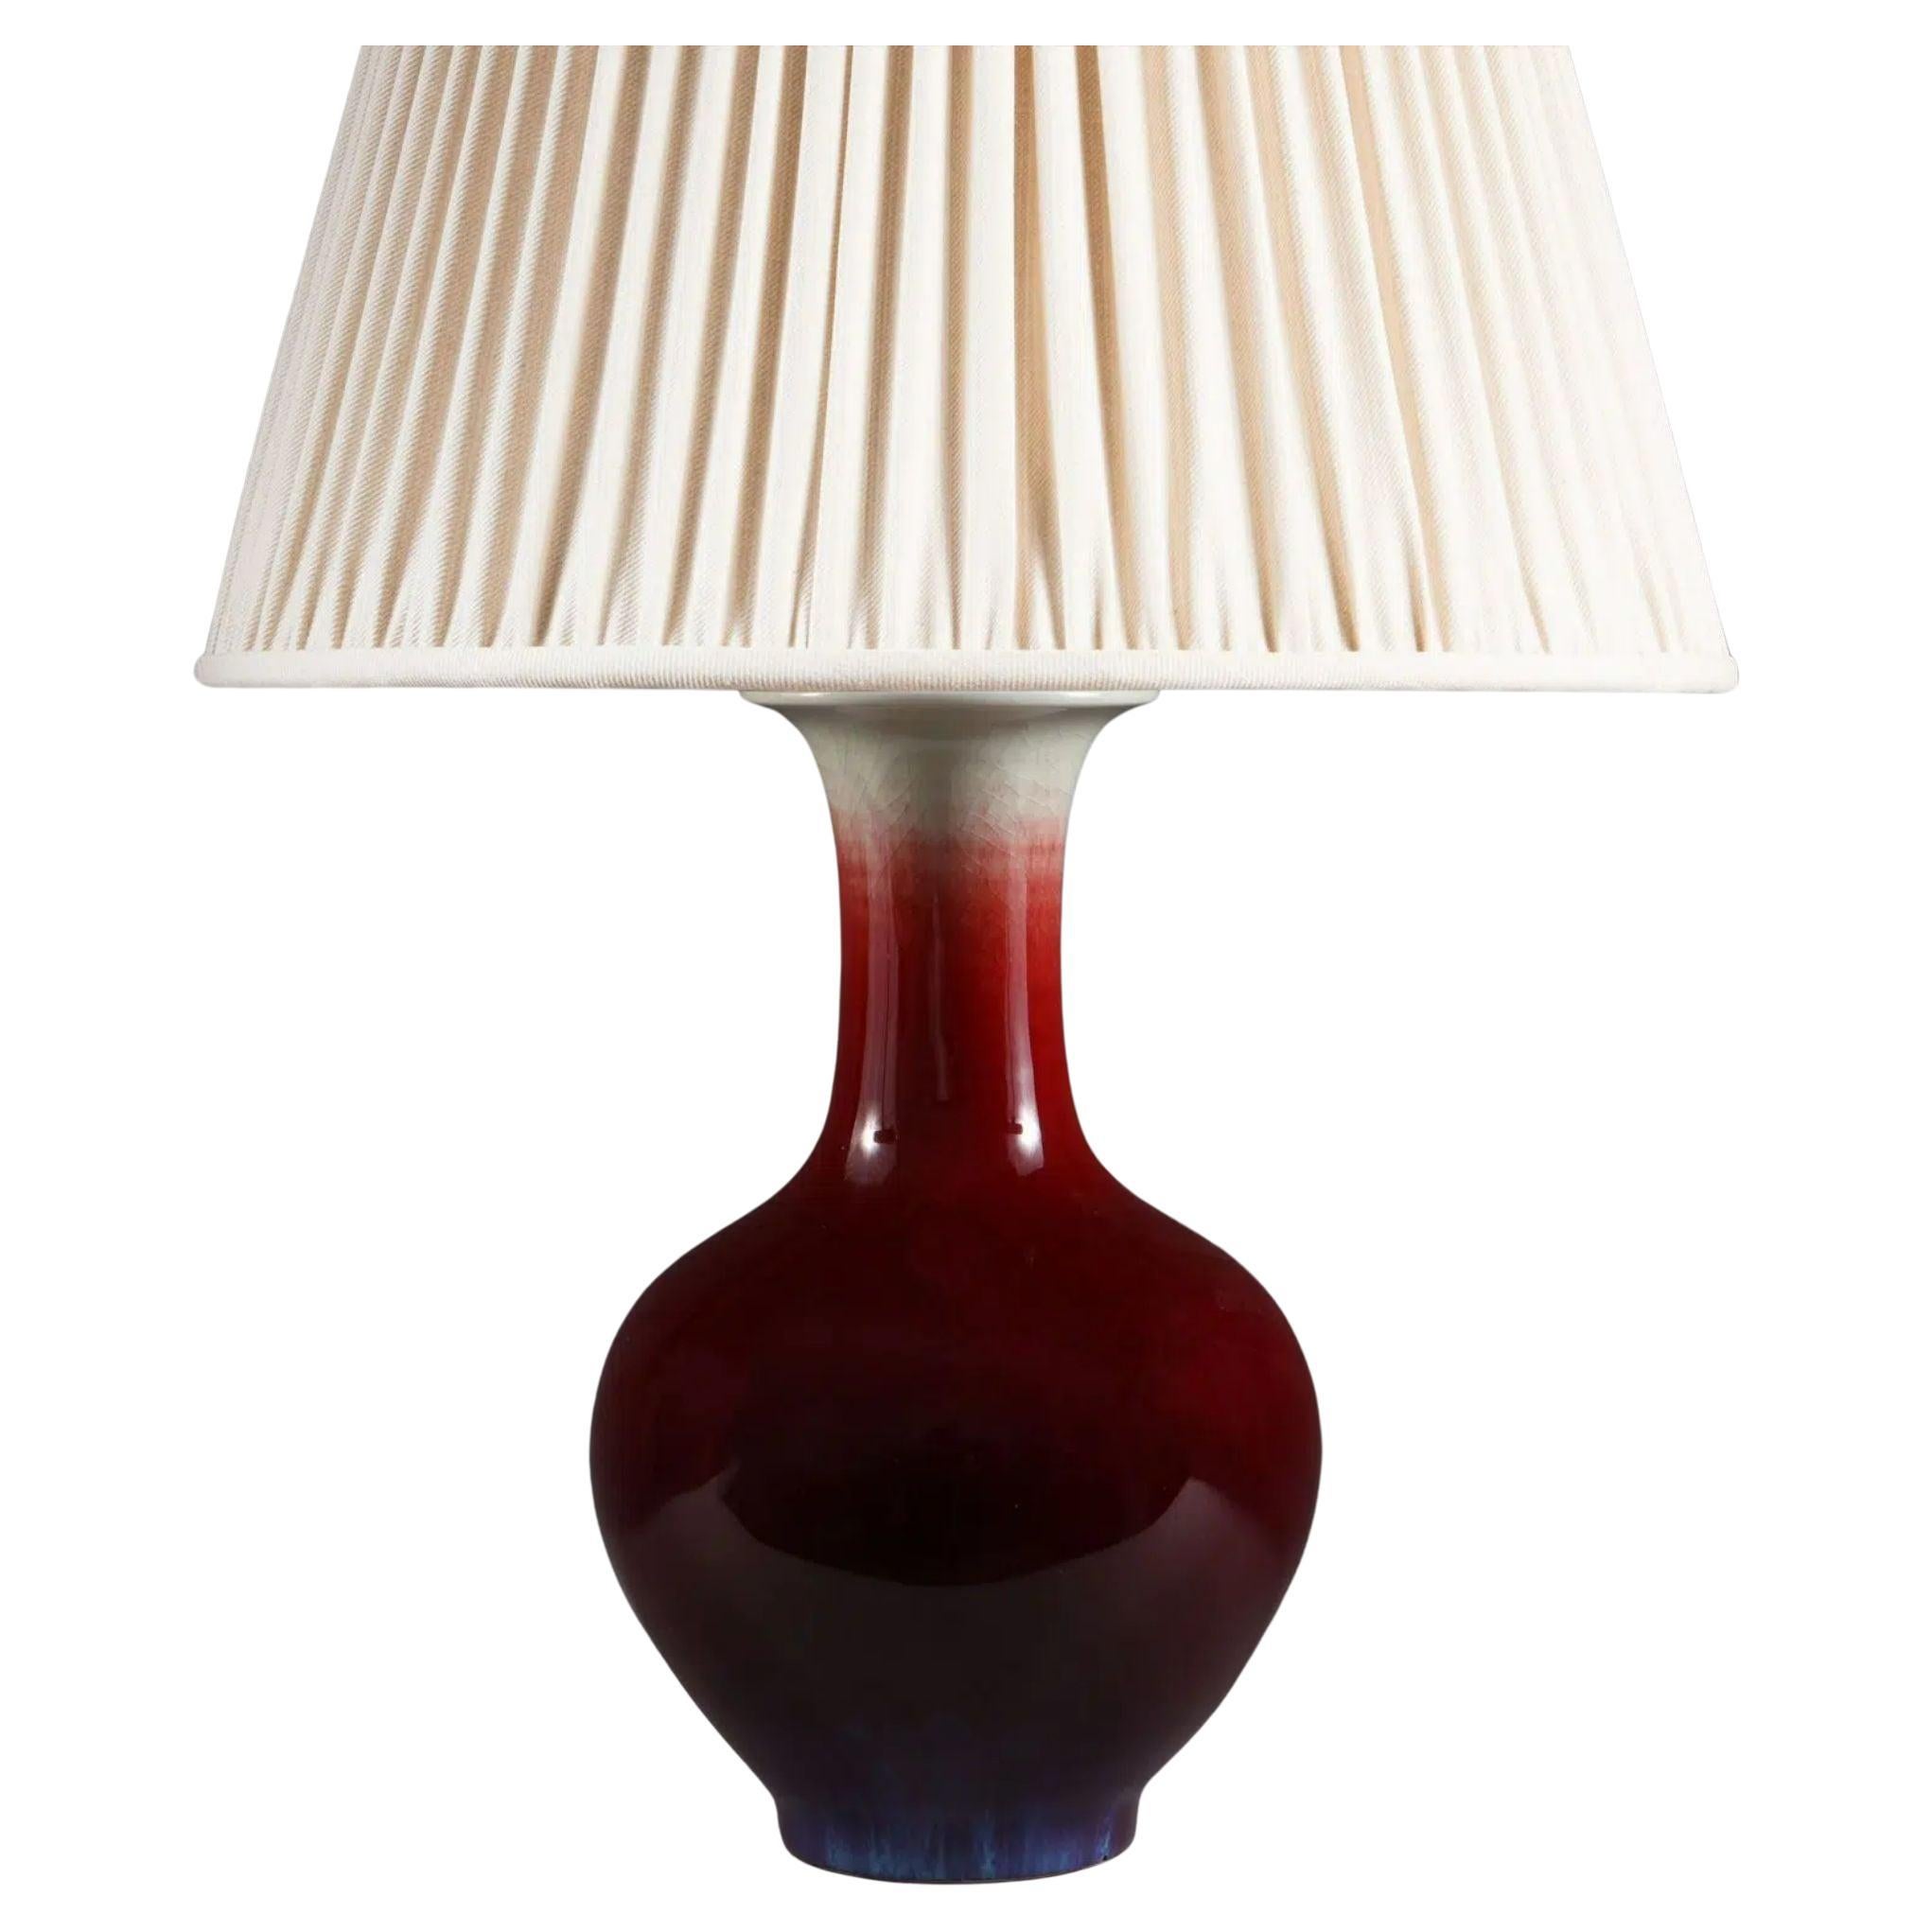 Chinese Sang De Boeuf Vase Mounted as a Table Lamp, 20th Century For Sale